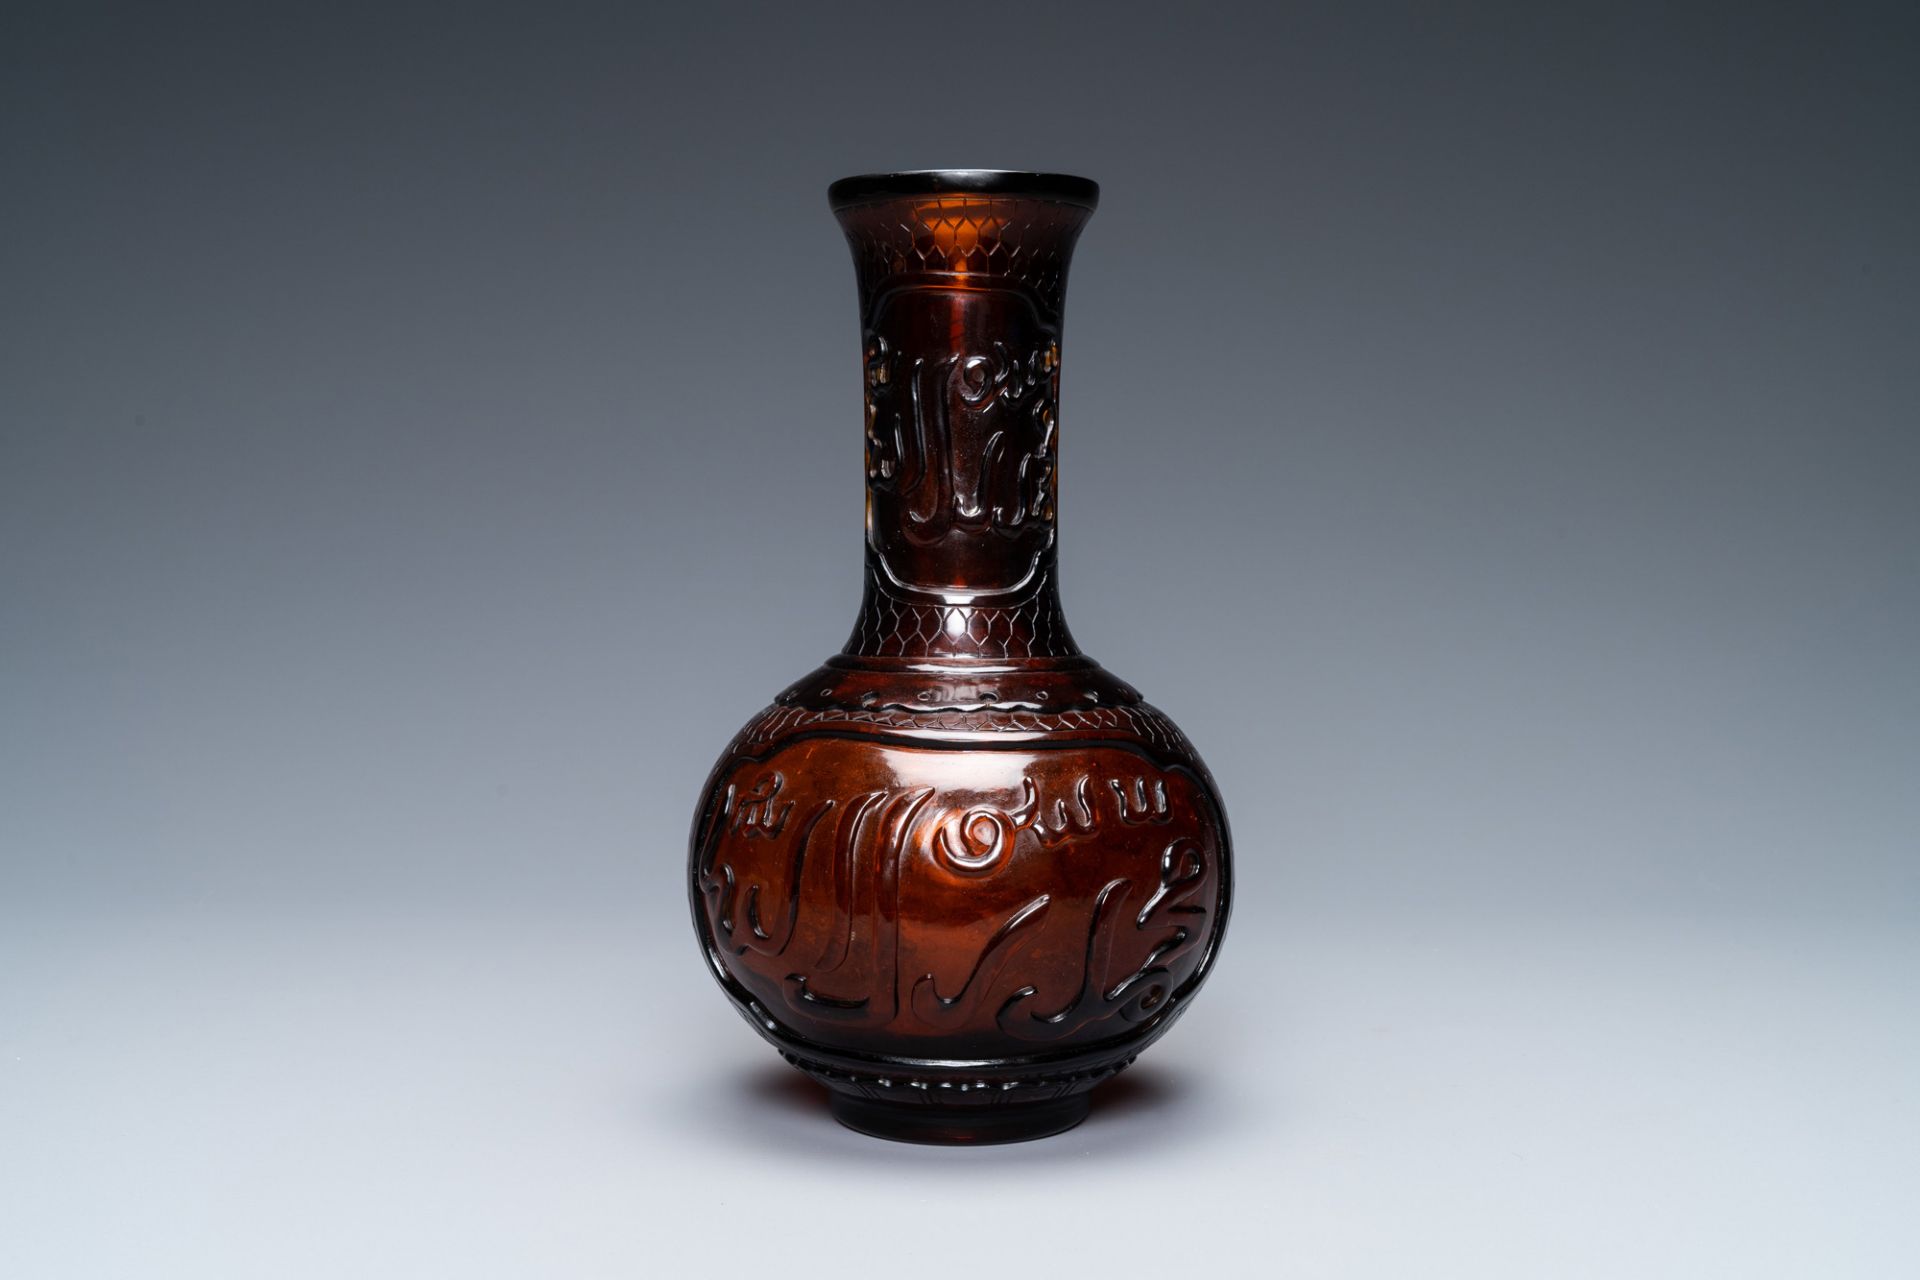 A Chinese Islamic market Beijing glass vase inscribed 'Allah' and 'Muhammad the Prophet', 18/19th C. - Image 5 of 10